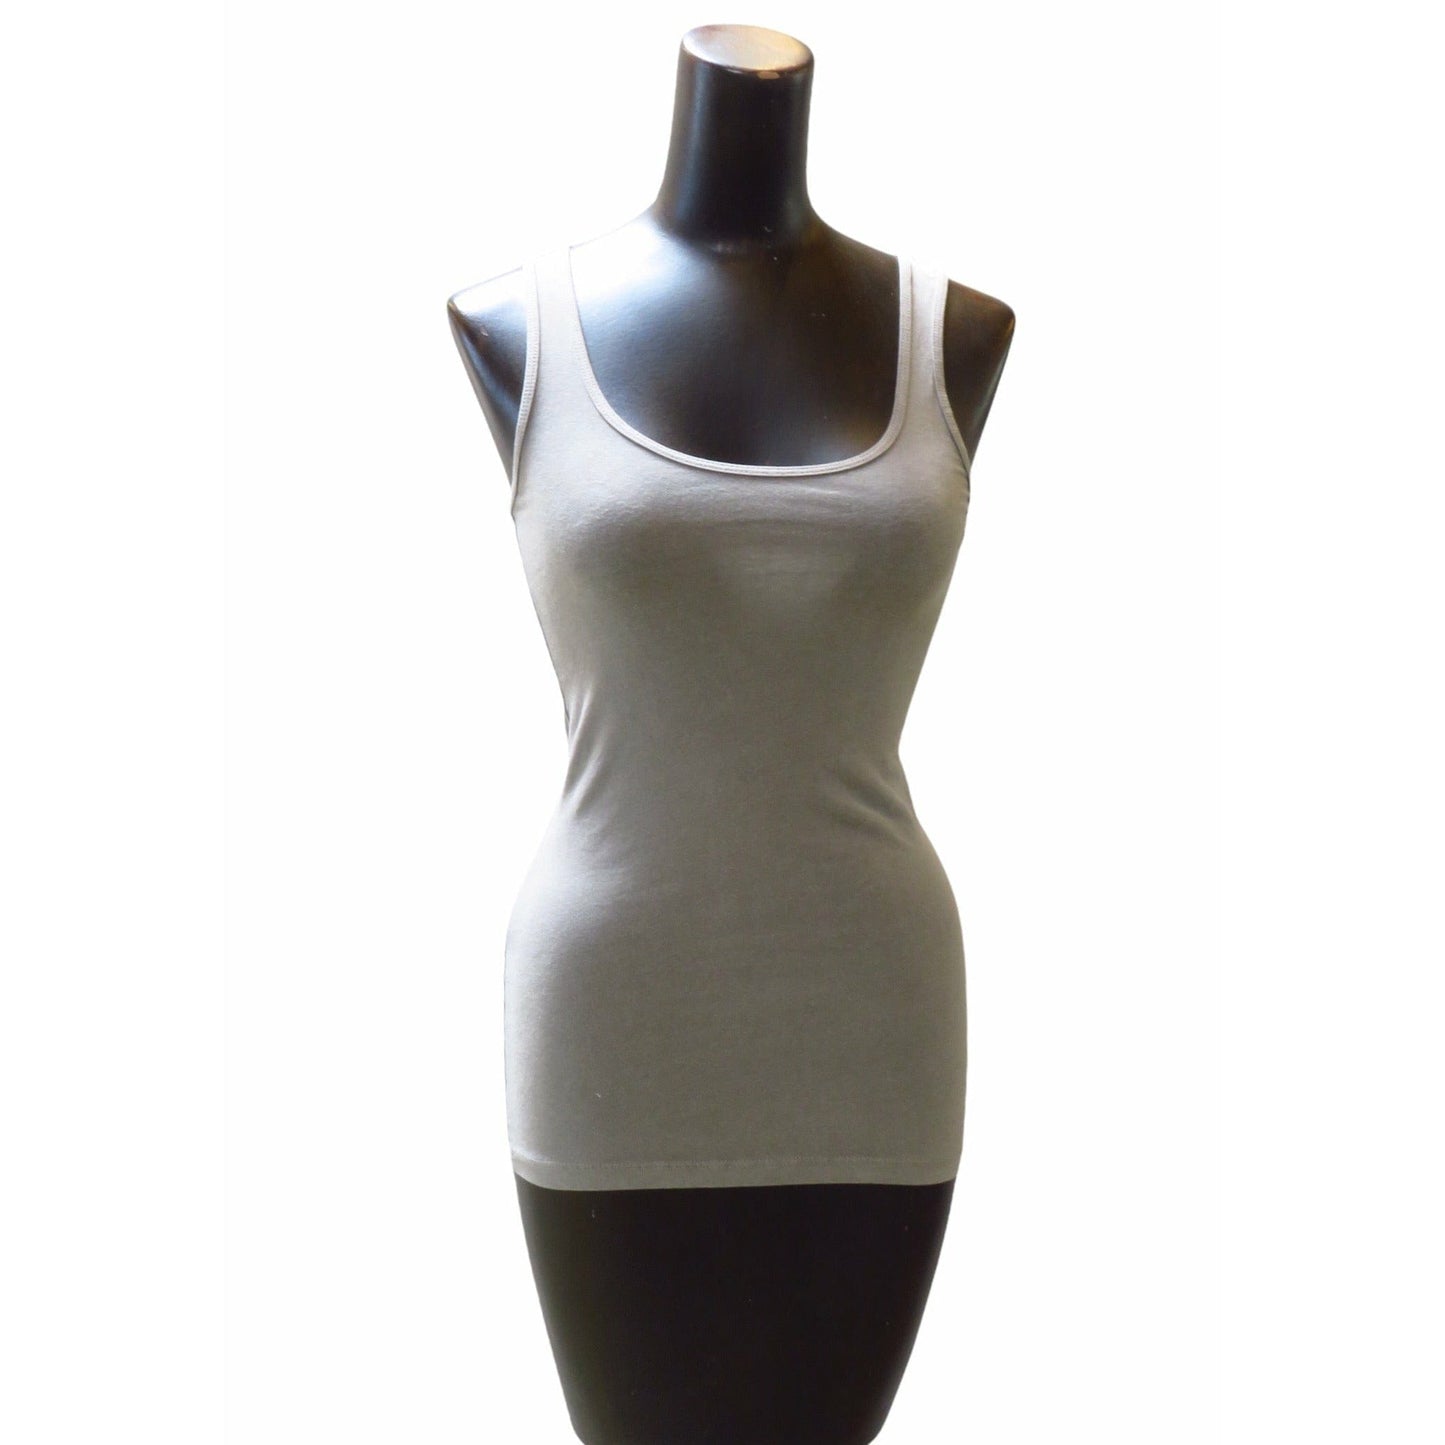 James Perse Shirts & Tops 1 / Greystone Pigment / Cotton and Lycra James Perse Long Tank